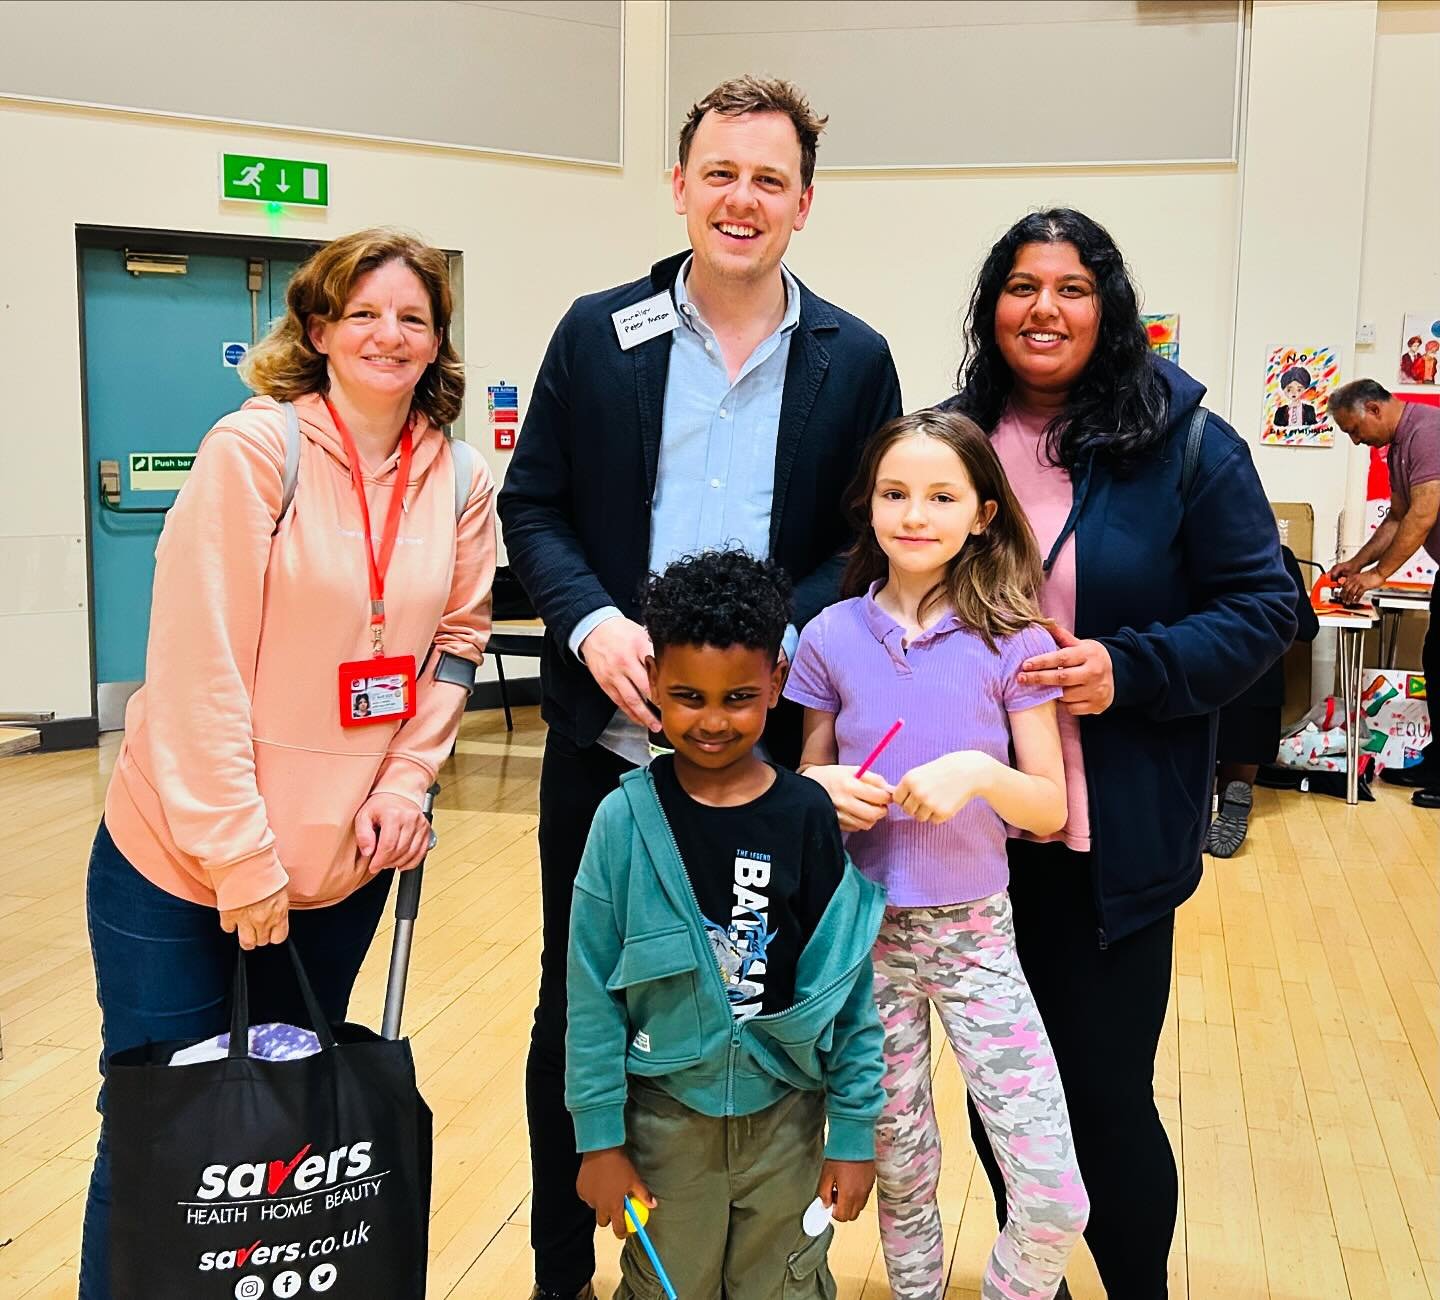 Some of our families had the amazing opportunity to meet Council Leader Peter Mason at the &ldquo;Your Voice, Your Town&rdquo; event today, alongside representatives from various wonderful organizations and other council members. Our work goes beyond